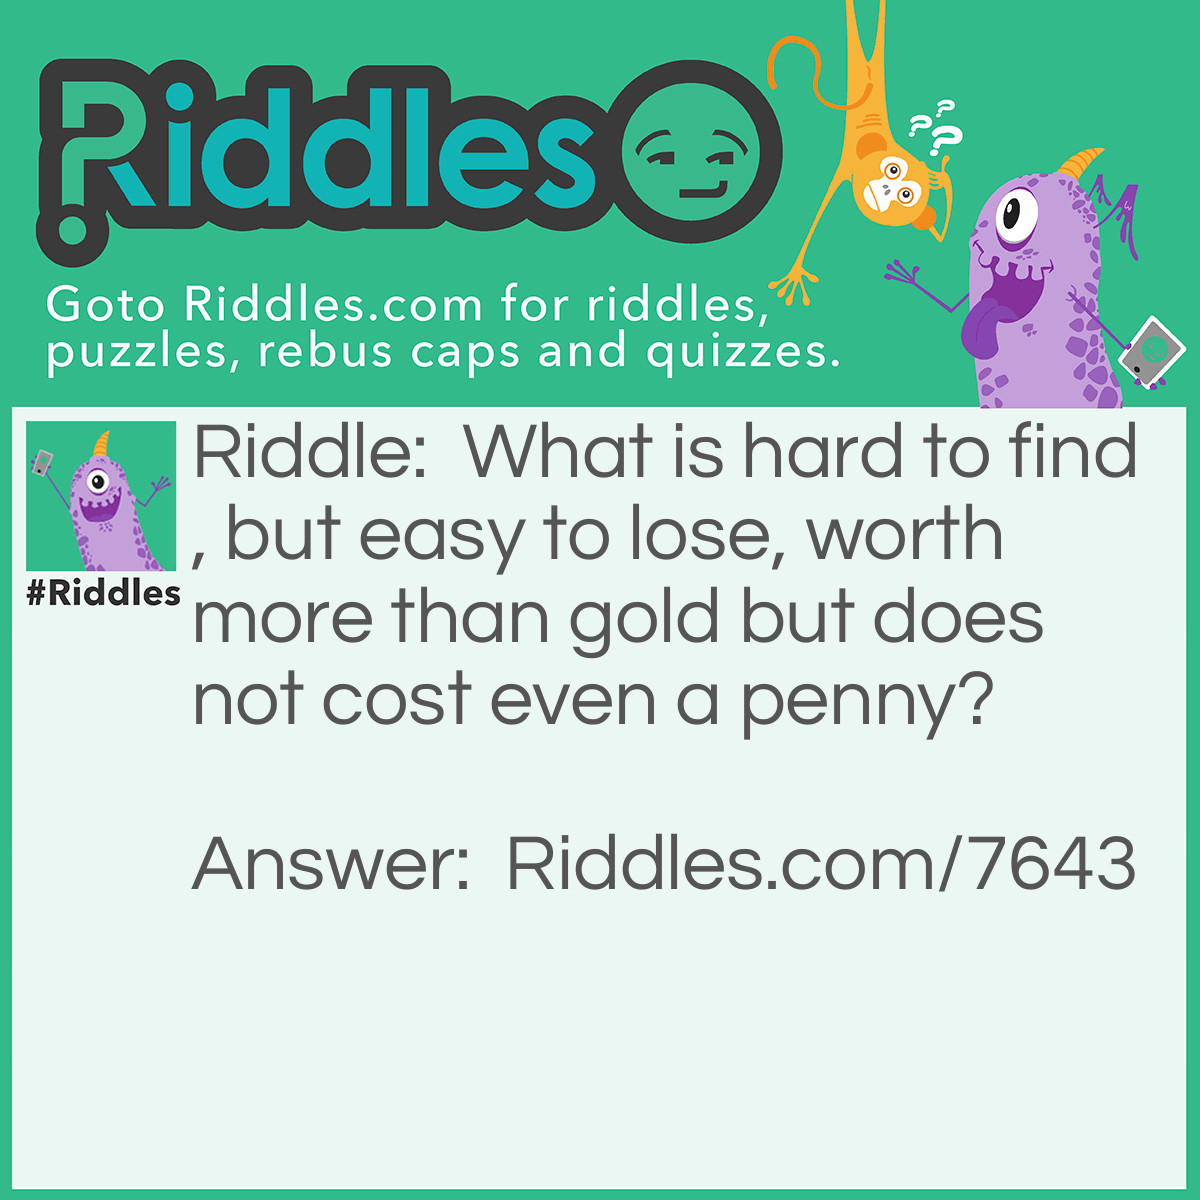 Riddle: What is hard to find, but easy to lose, worth more than gold but does not cost even a penny? Answer: A friend.